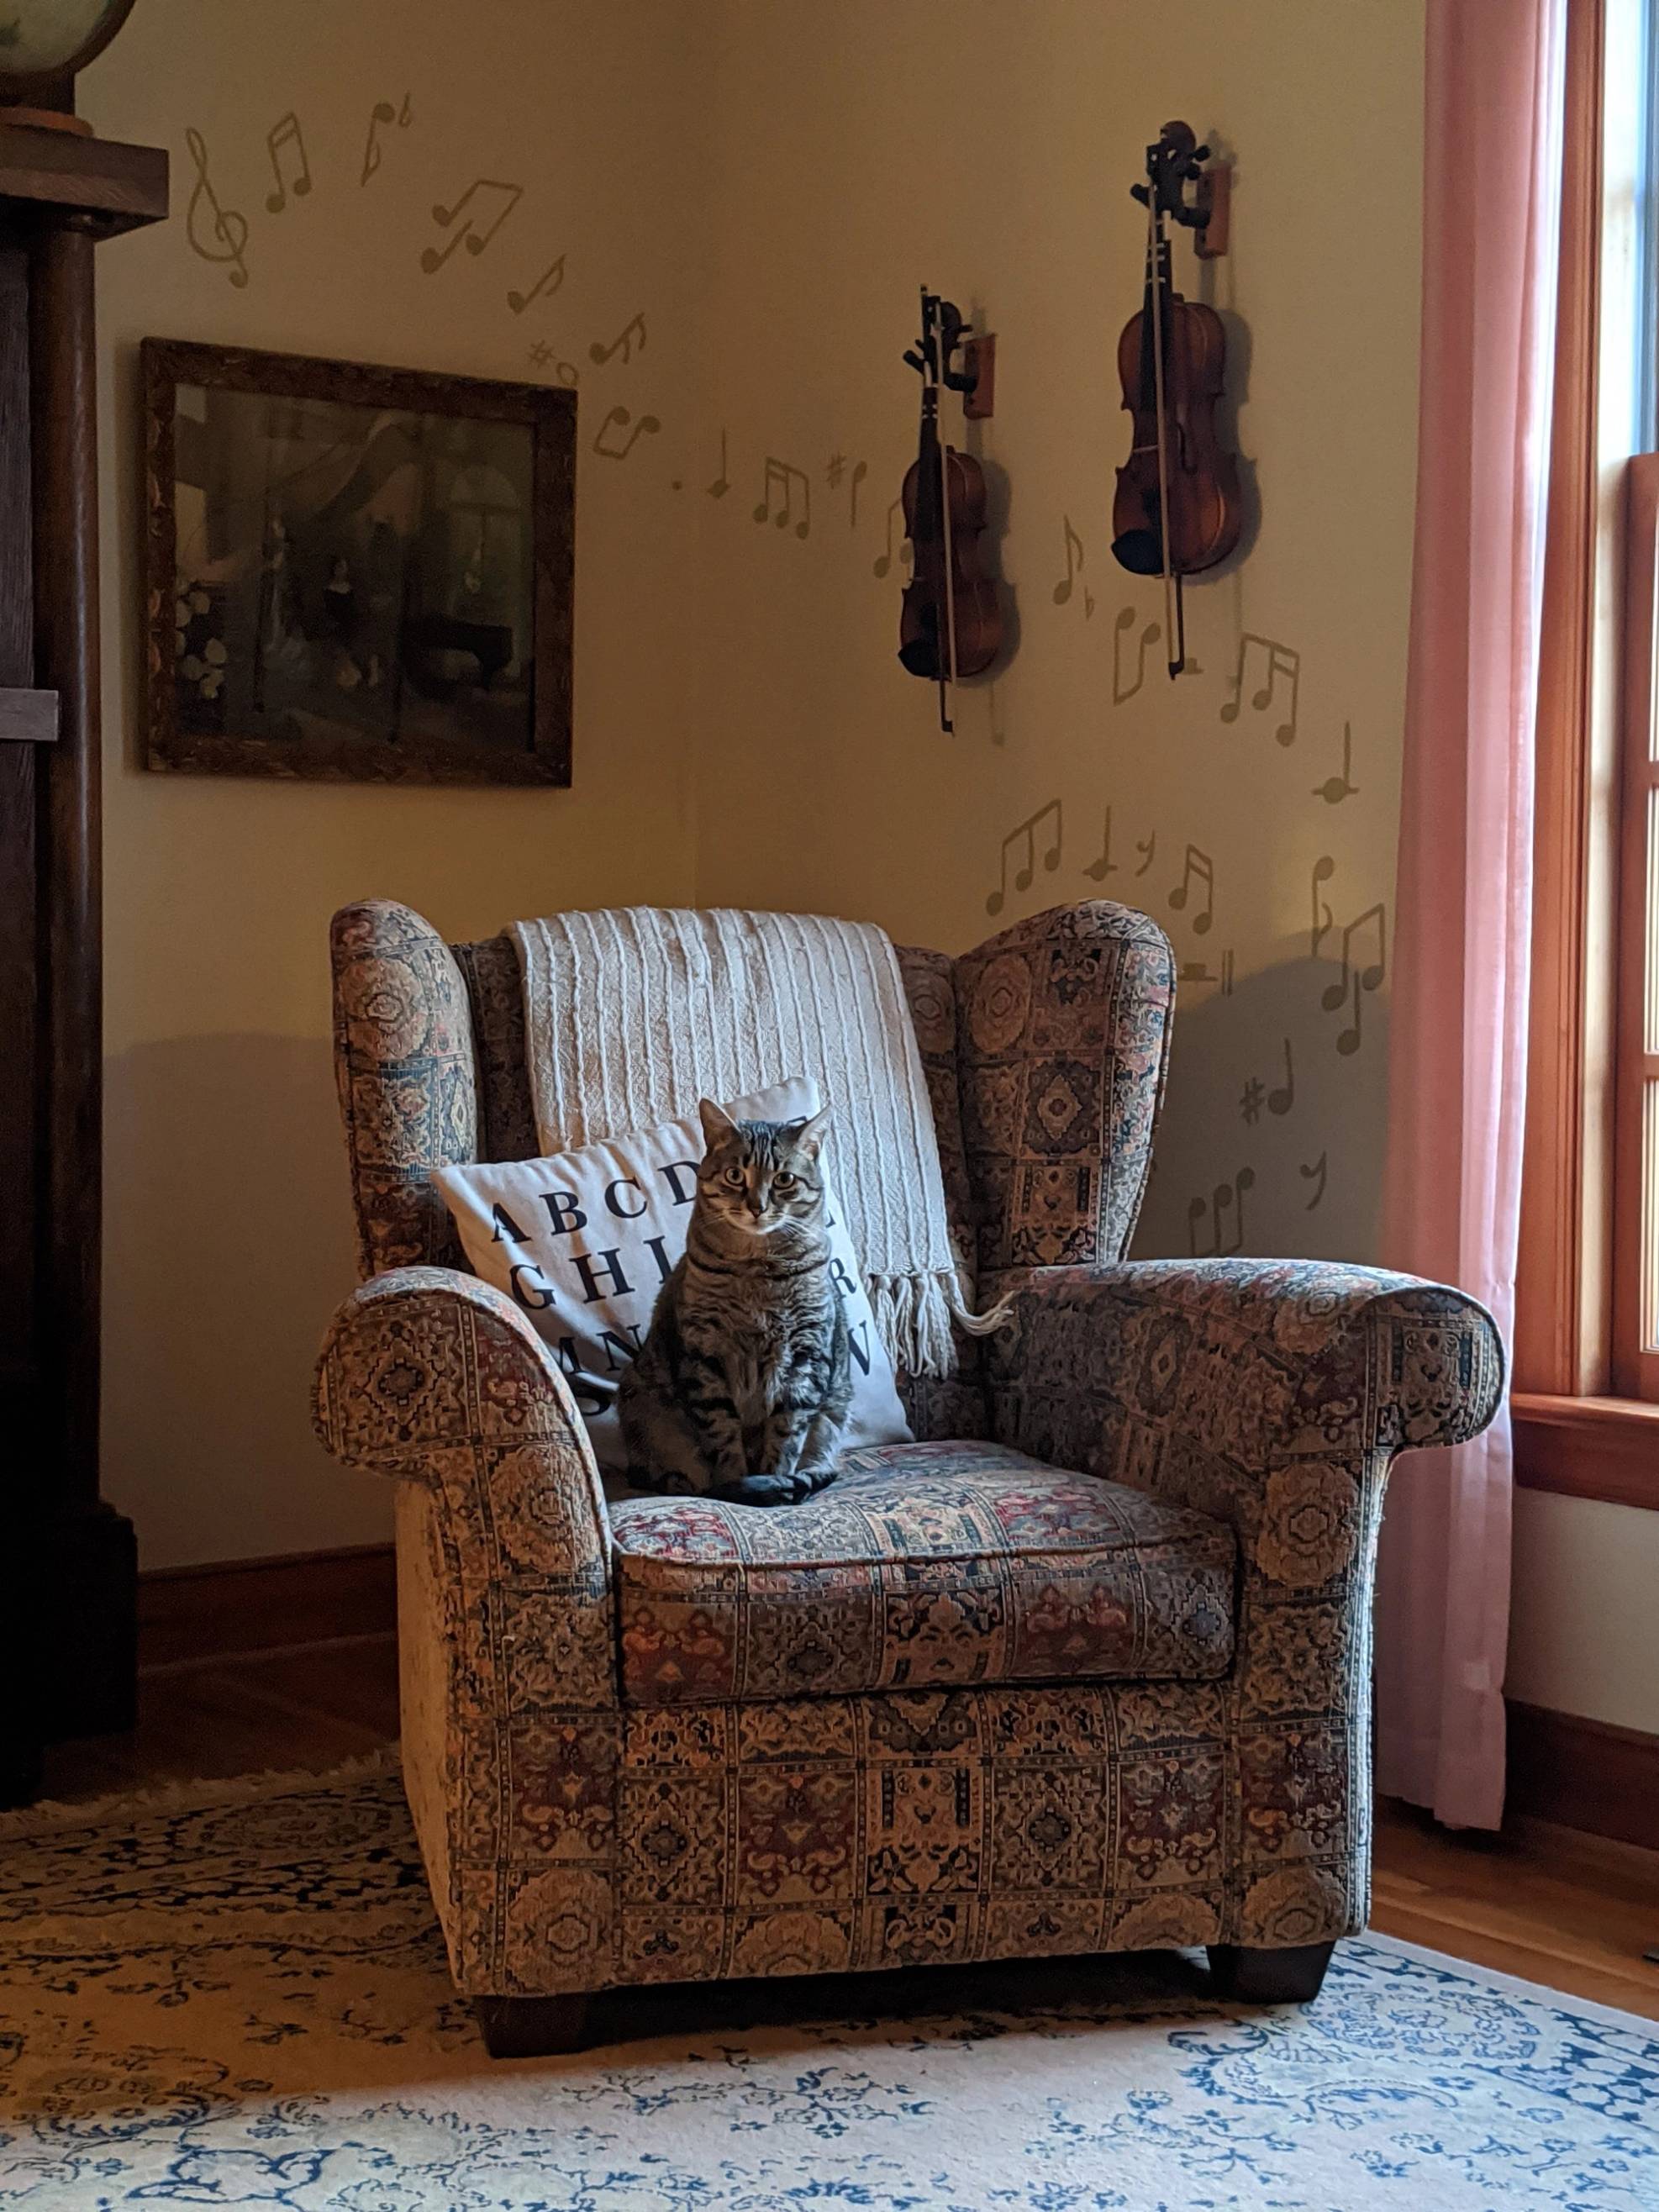 cat sitting in old chair